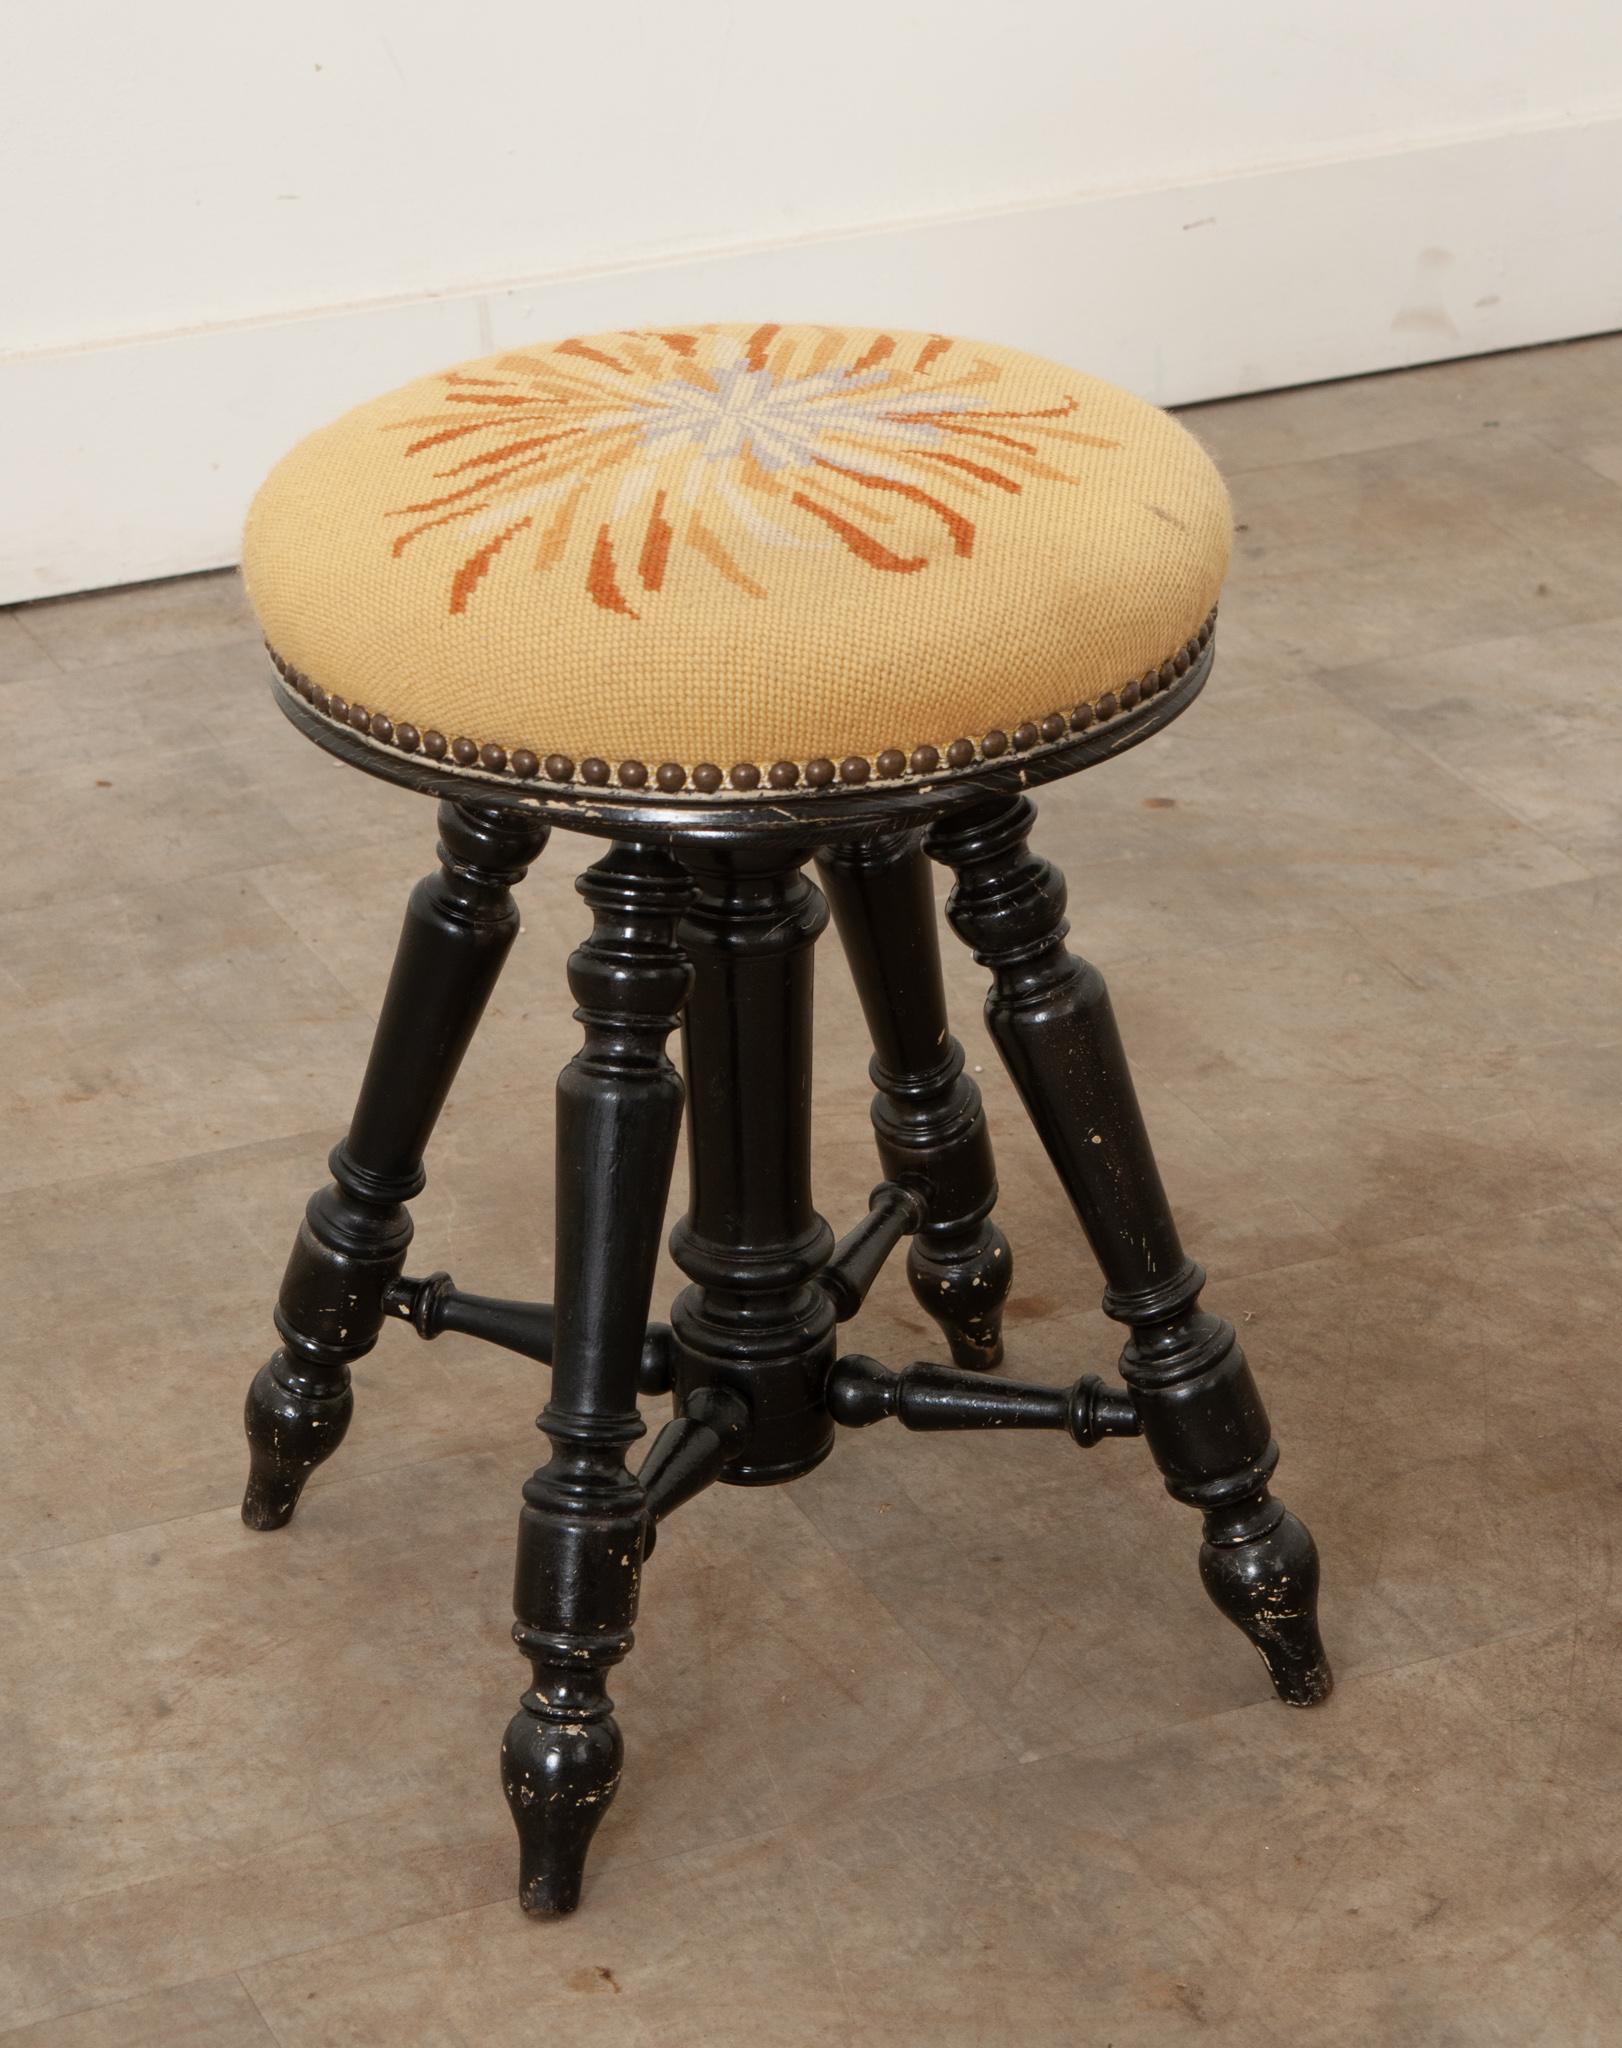 A round French piano stool made of turned wood with an ebonized finish. The top cushion is upholstered with a needlepoint fabric and nailhead trim. The center of the stool has a functioning steel screw to raise and lower the seat height making this